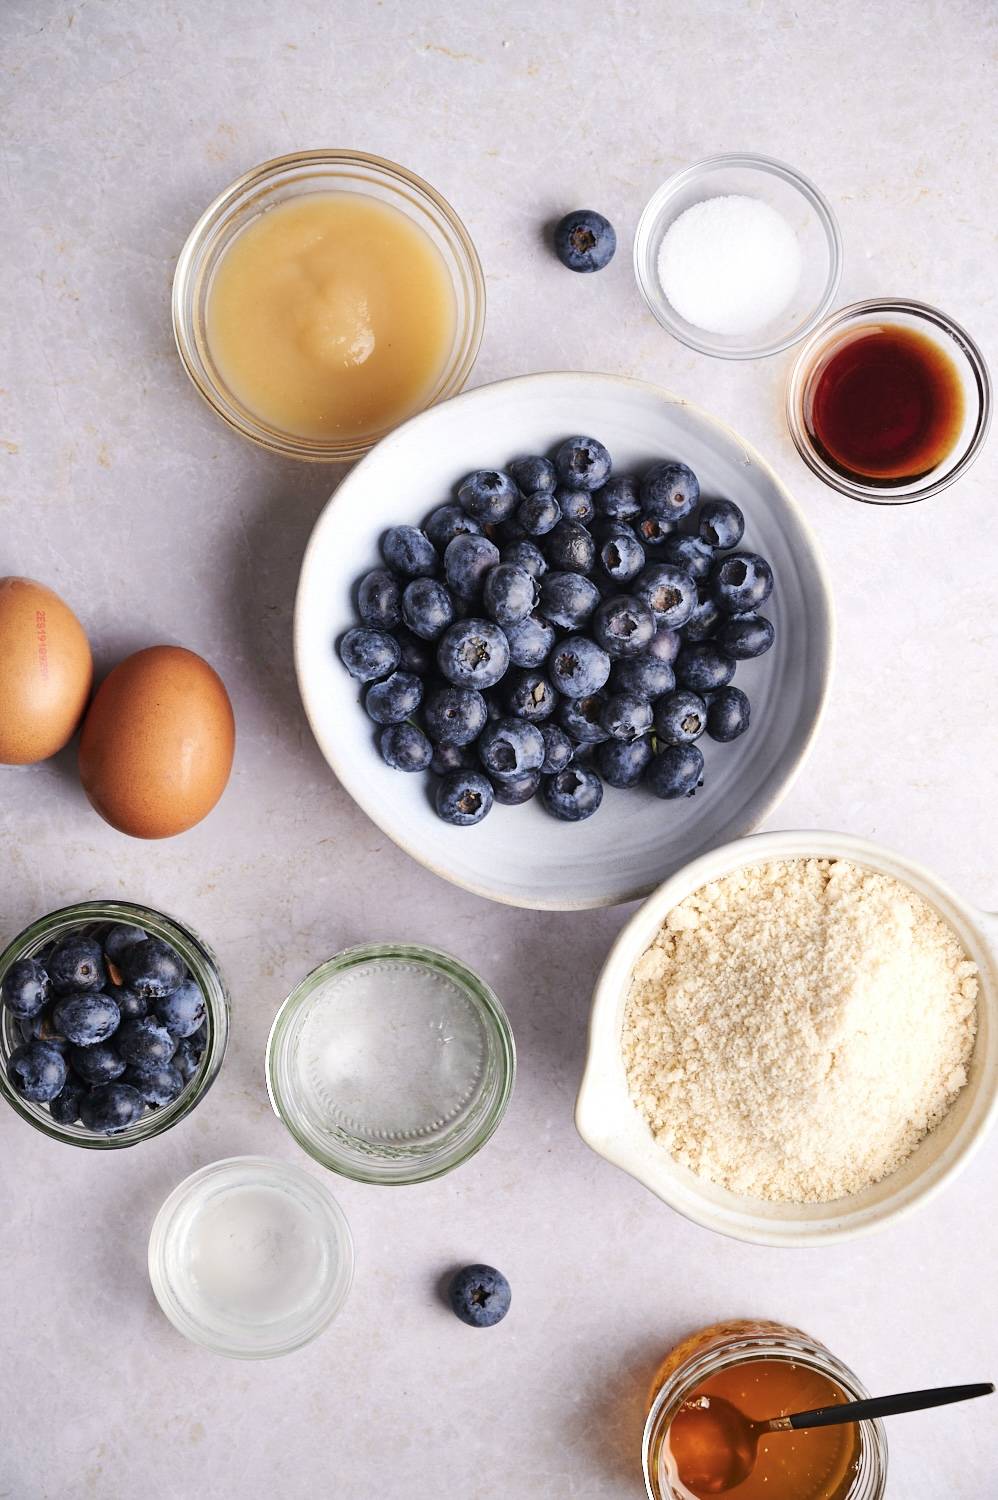 Ingredients for low carb almond pancakes including almond flour, blueberries, eggs, applesauce, water, vanilla extract, and coconut oil.